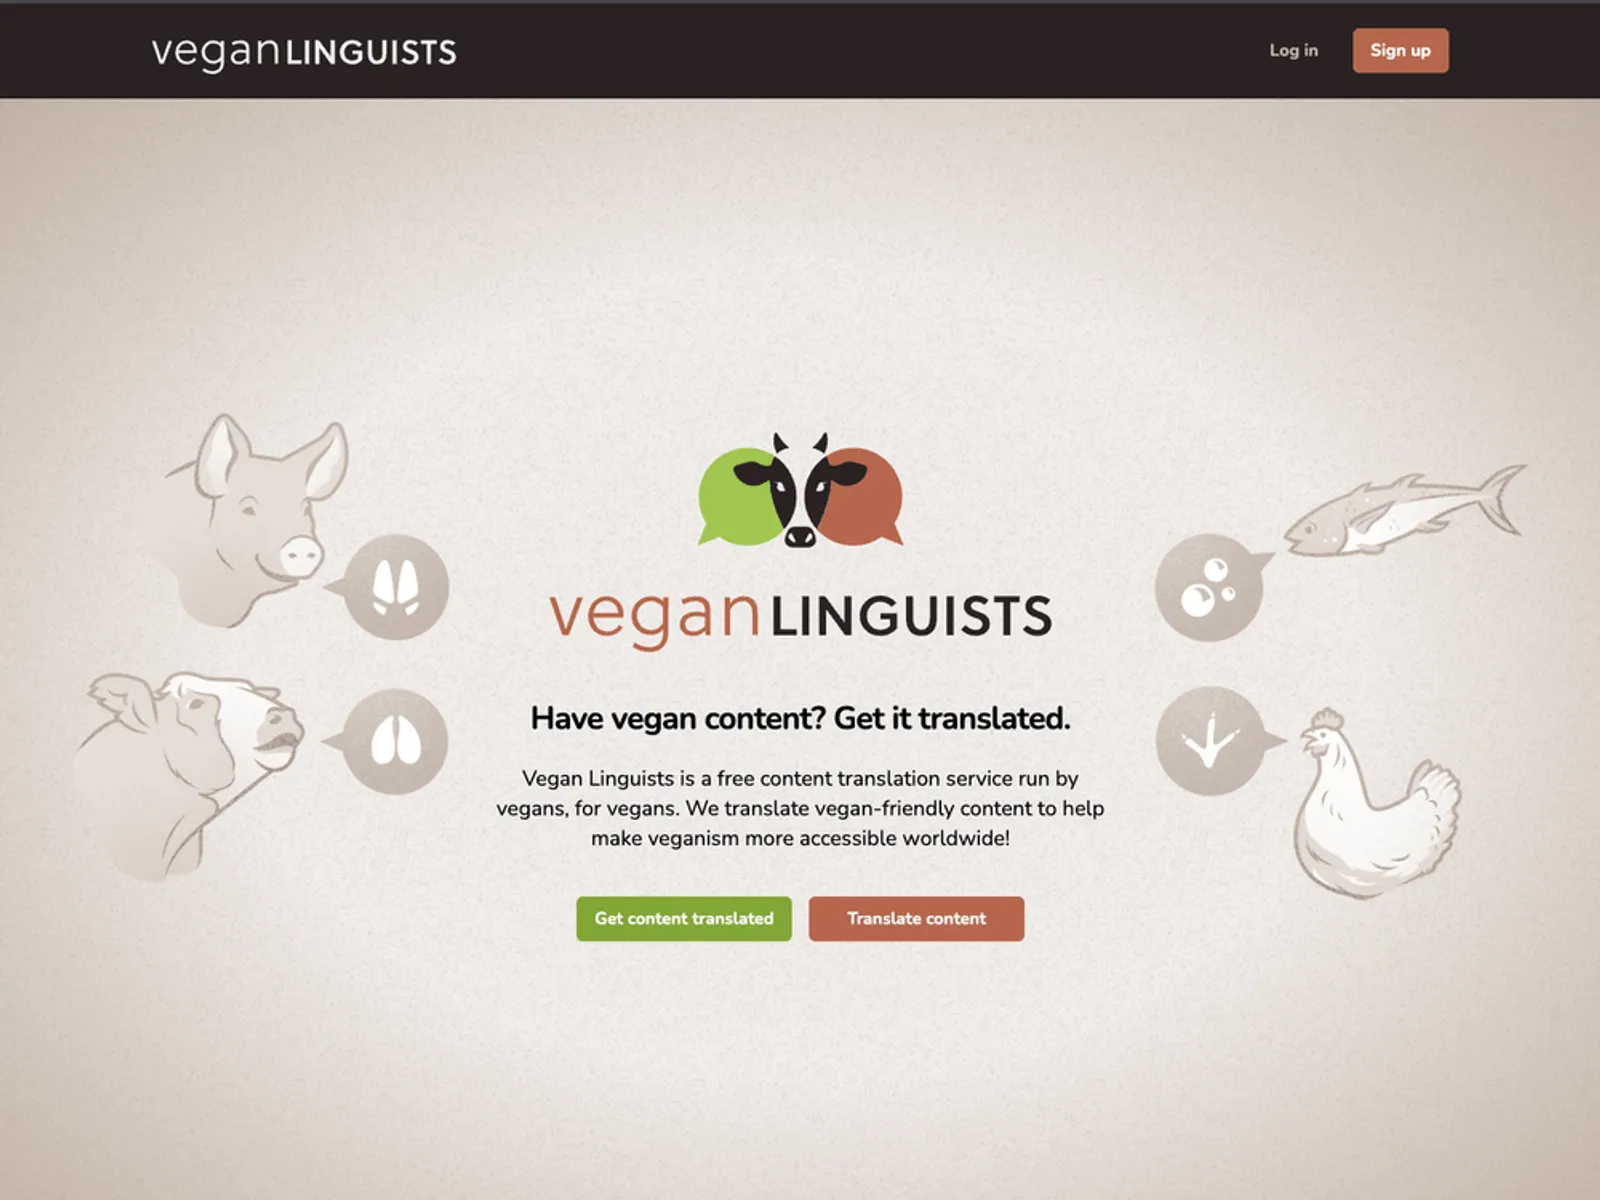 A screenshot of the Vegan Linguists home page